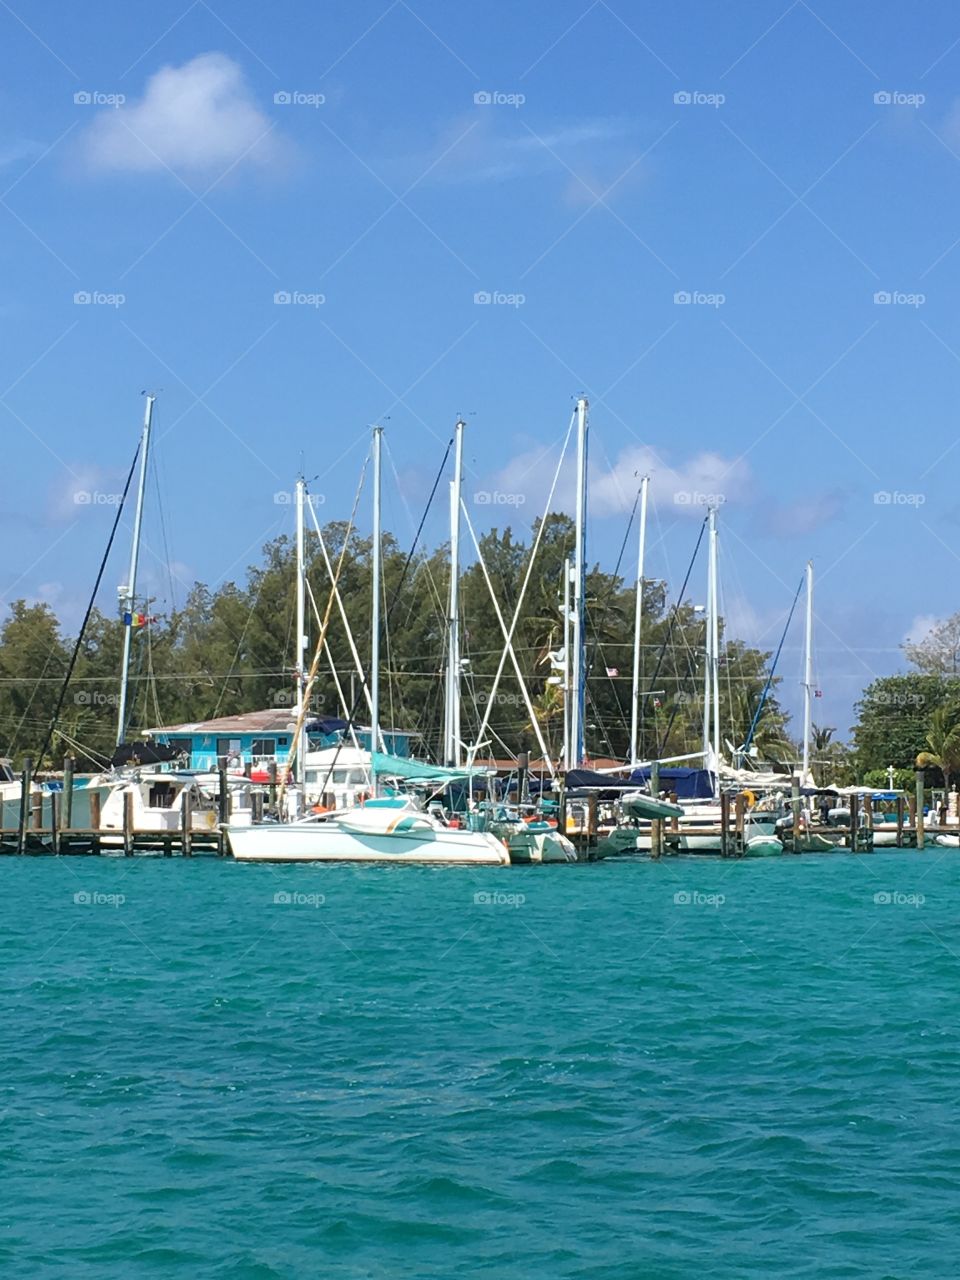 Bimini sailboats gather at the end of their workday